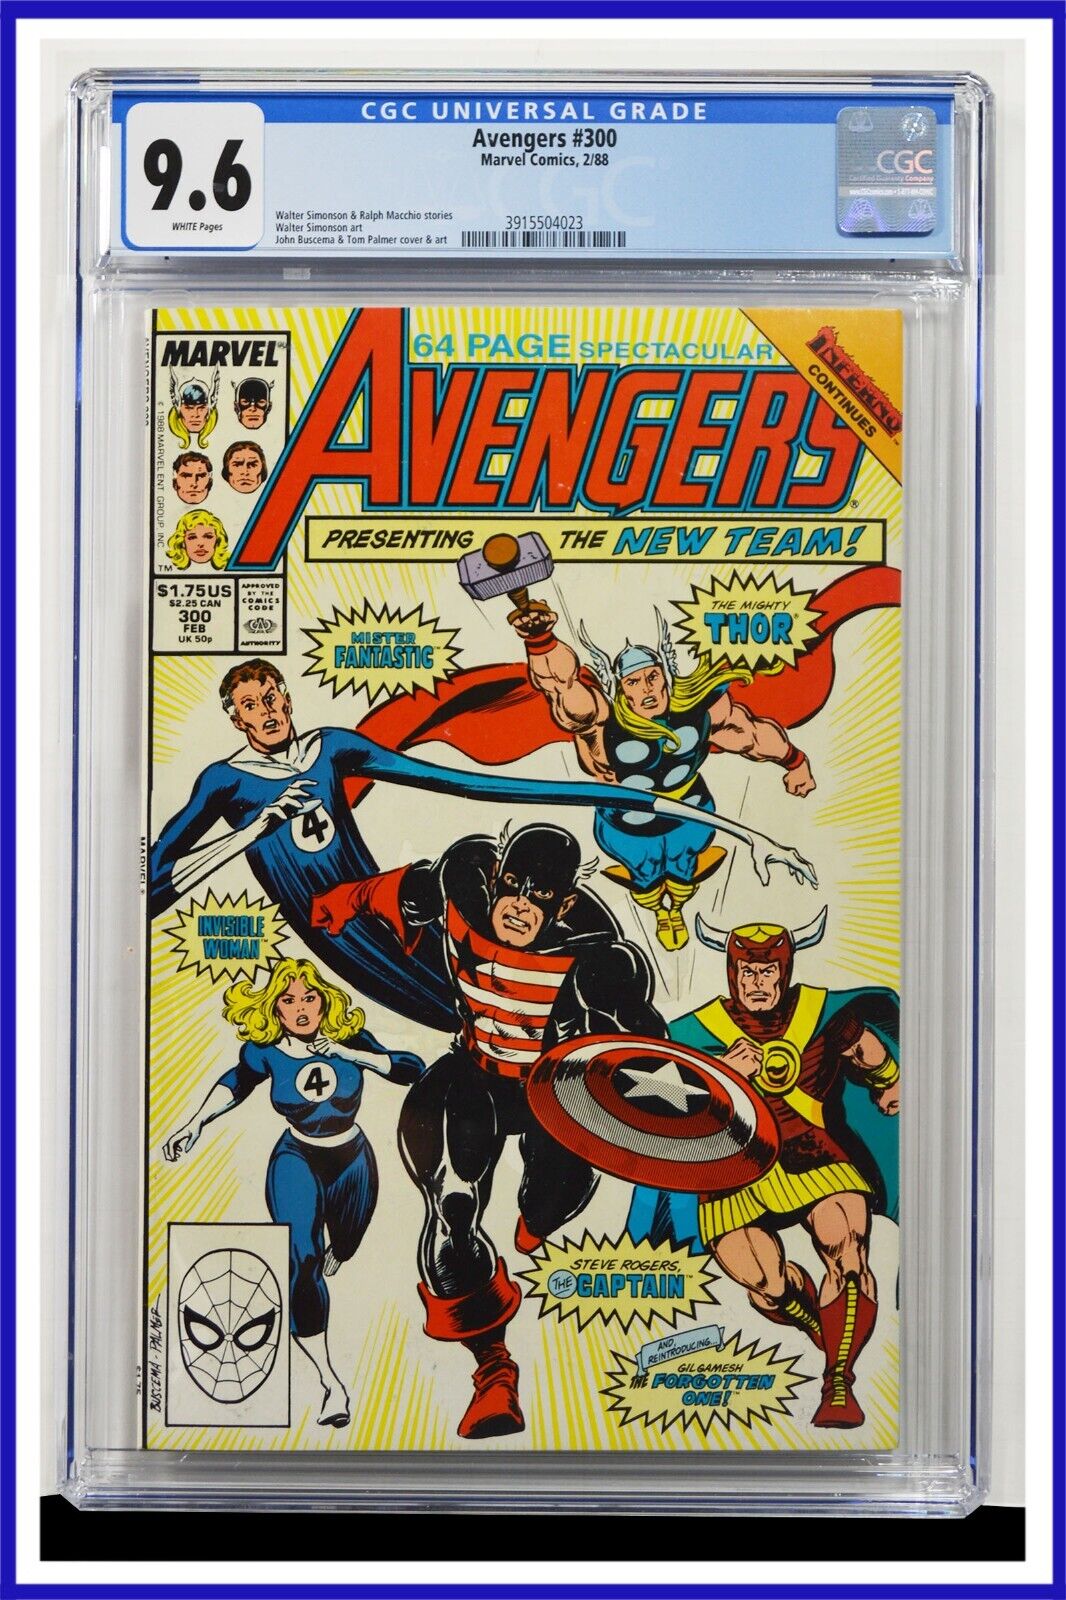 Avengers #300 CGC Graded 9.6 Marvel February 1988 White Pages Comic Book.